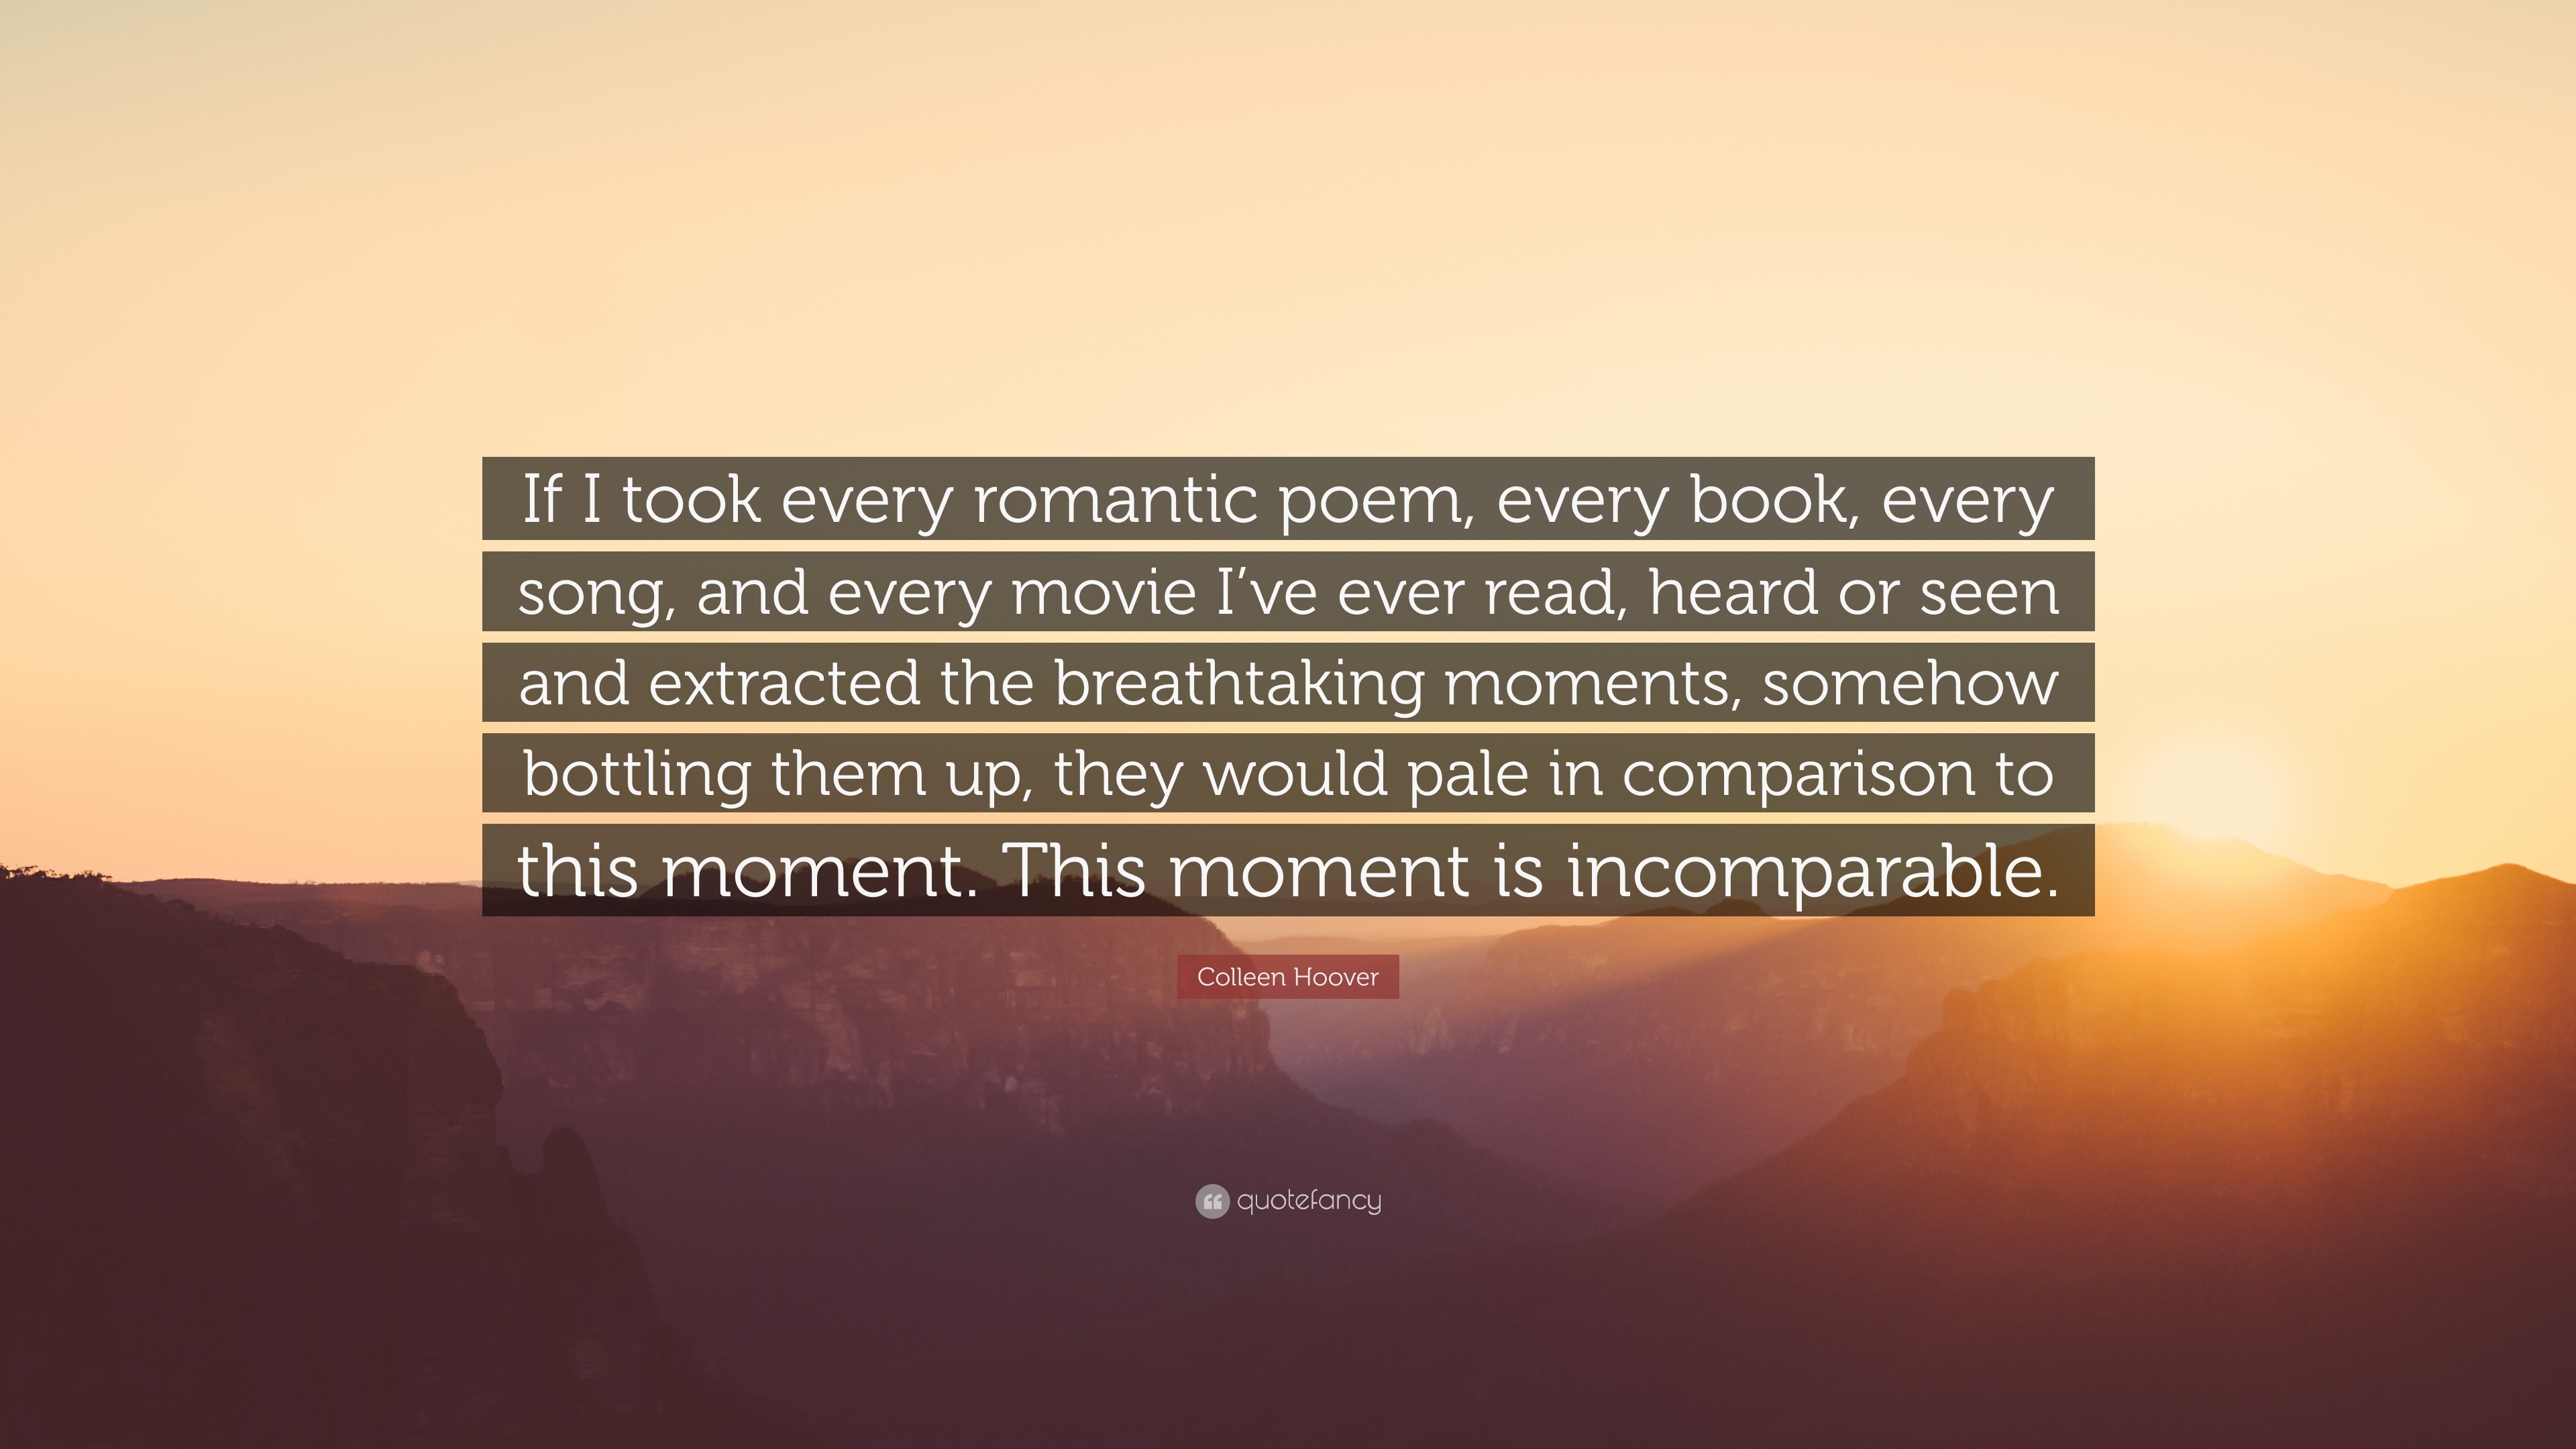 Colleen Hoover Quote: “If I took every romantic poem, every book, every